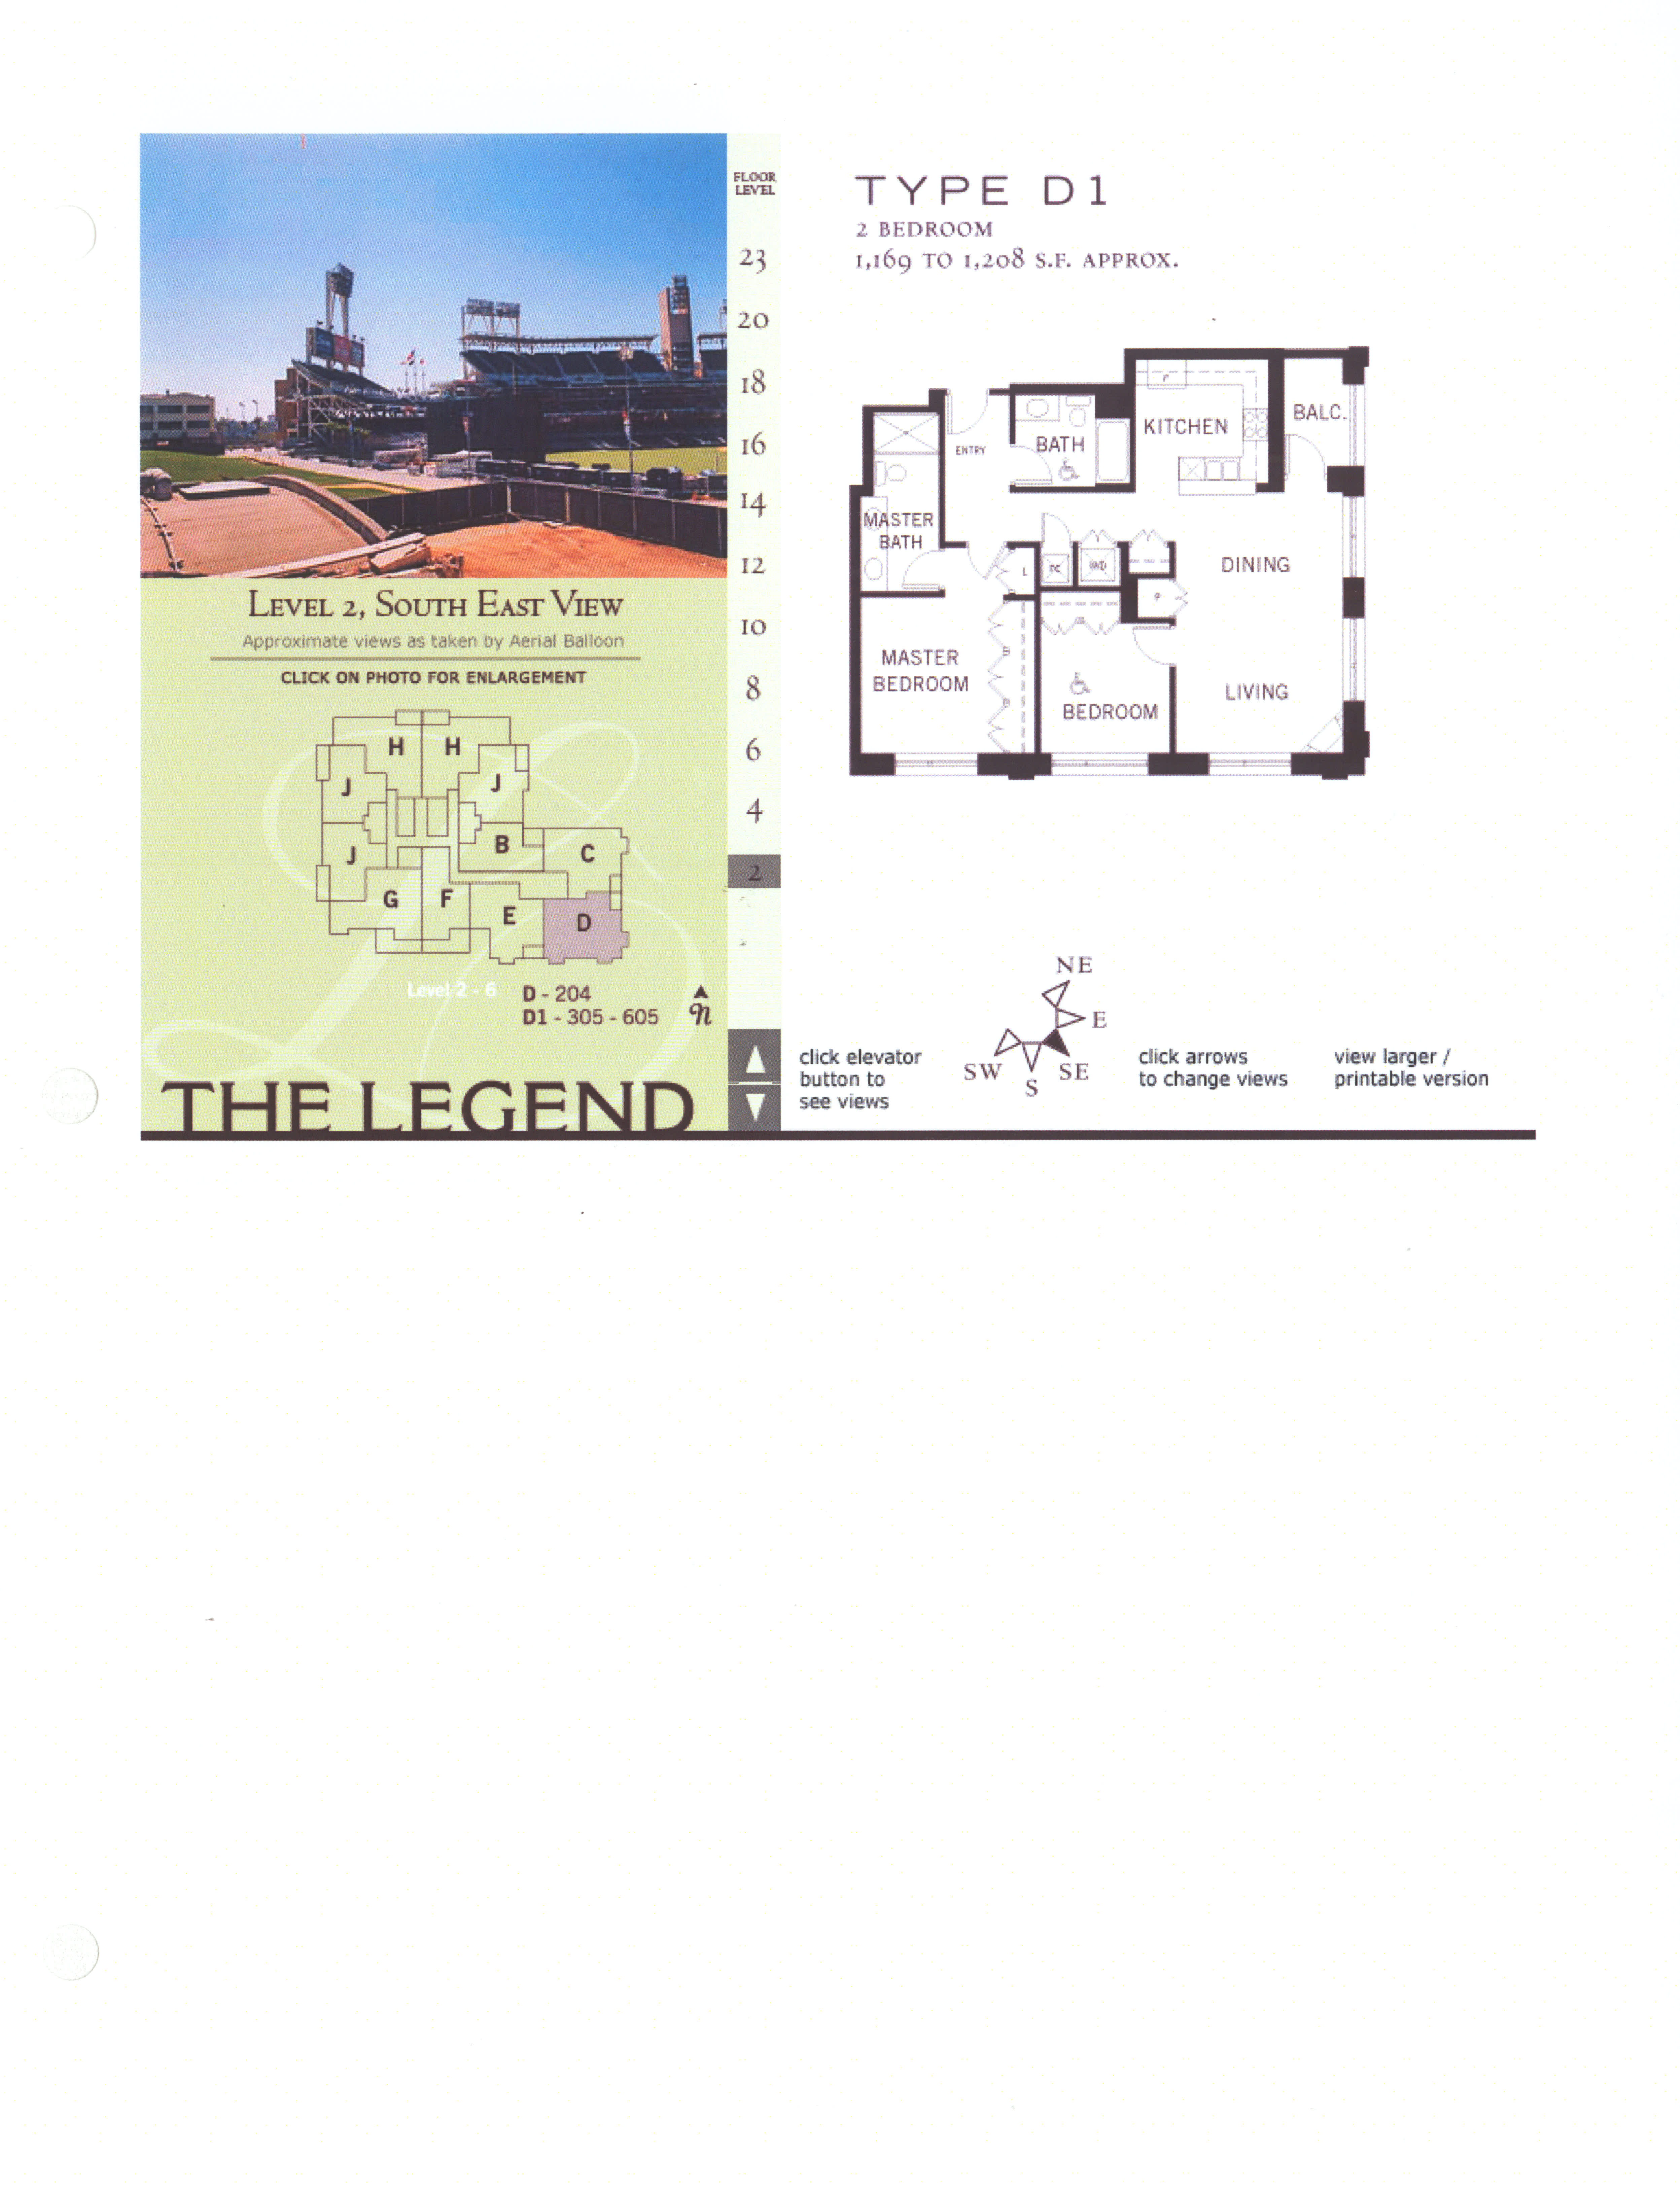 The Legend Floor Plan Level 2, South East View - Type D1